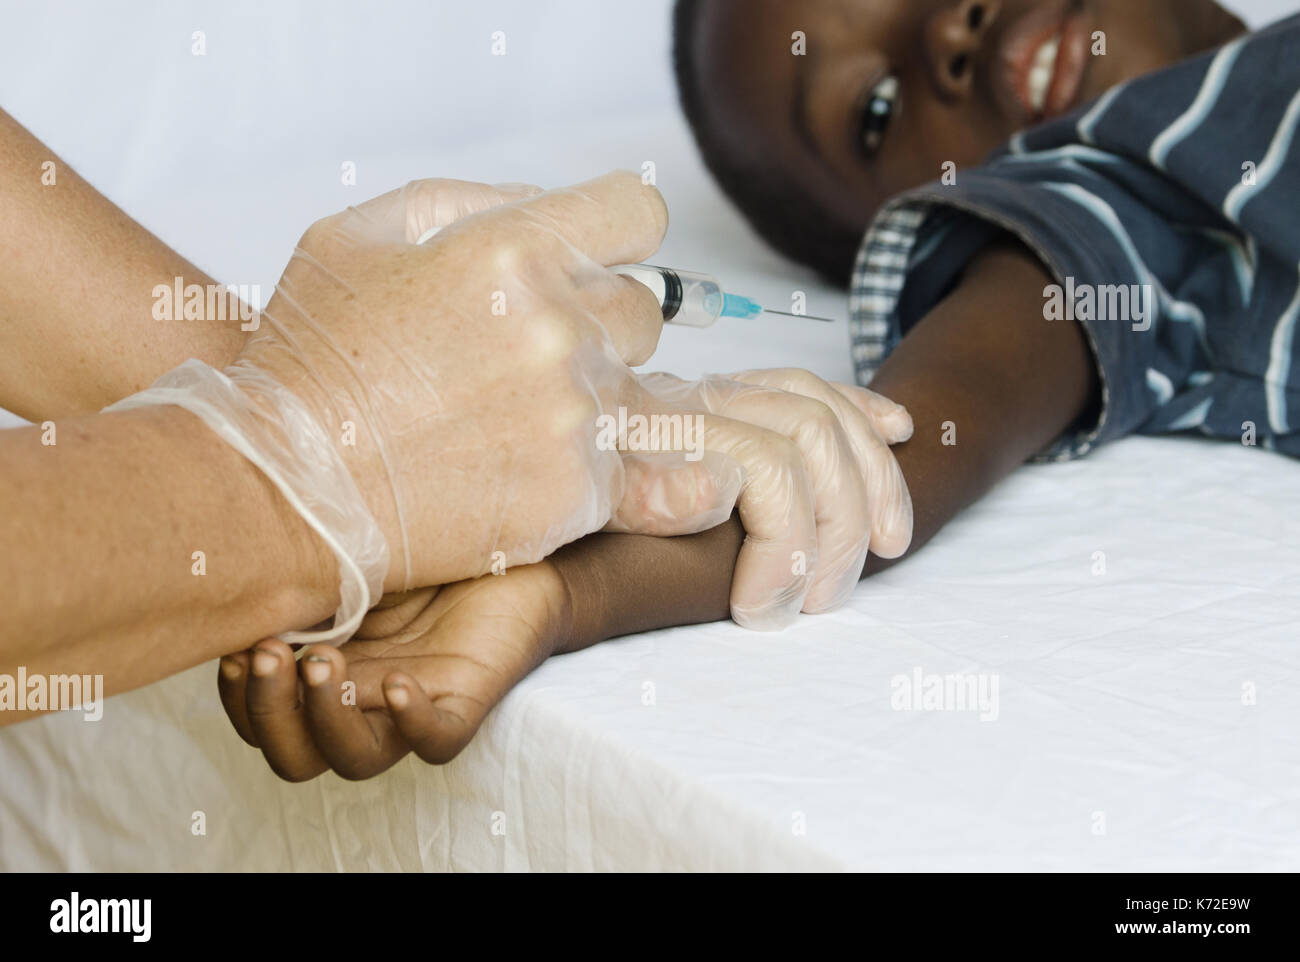 Little African Boy Getting Needle Injection from White Nurse Woman Stock Photo